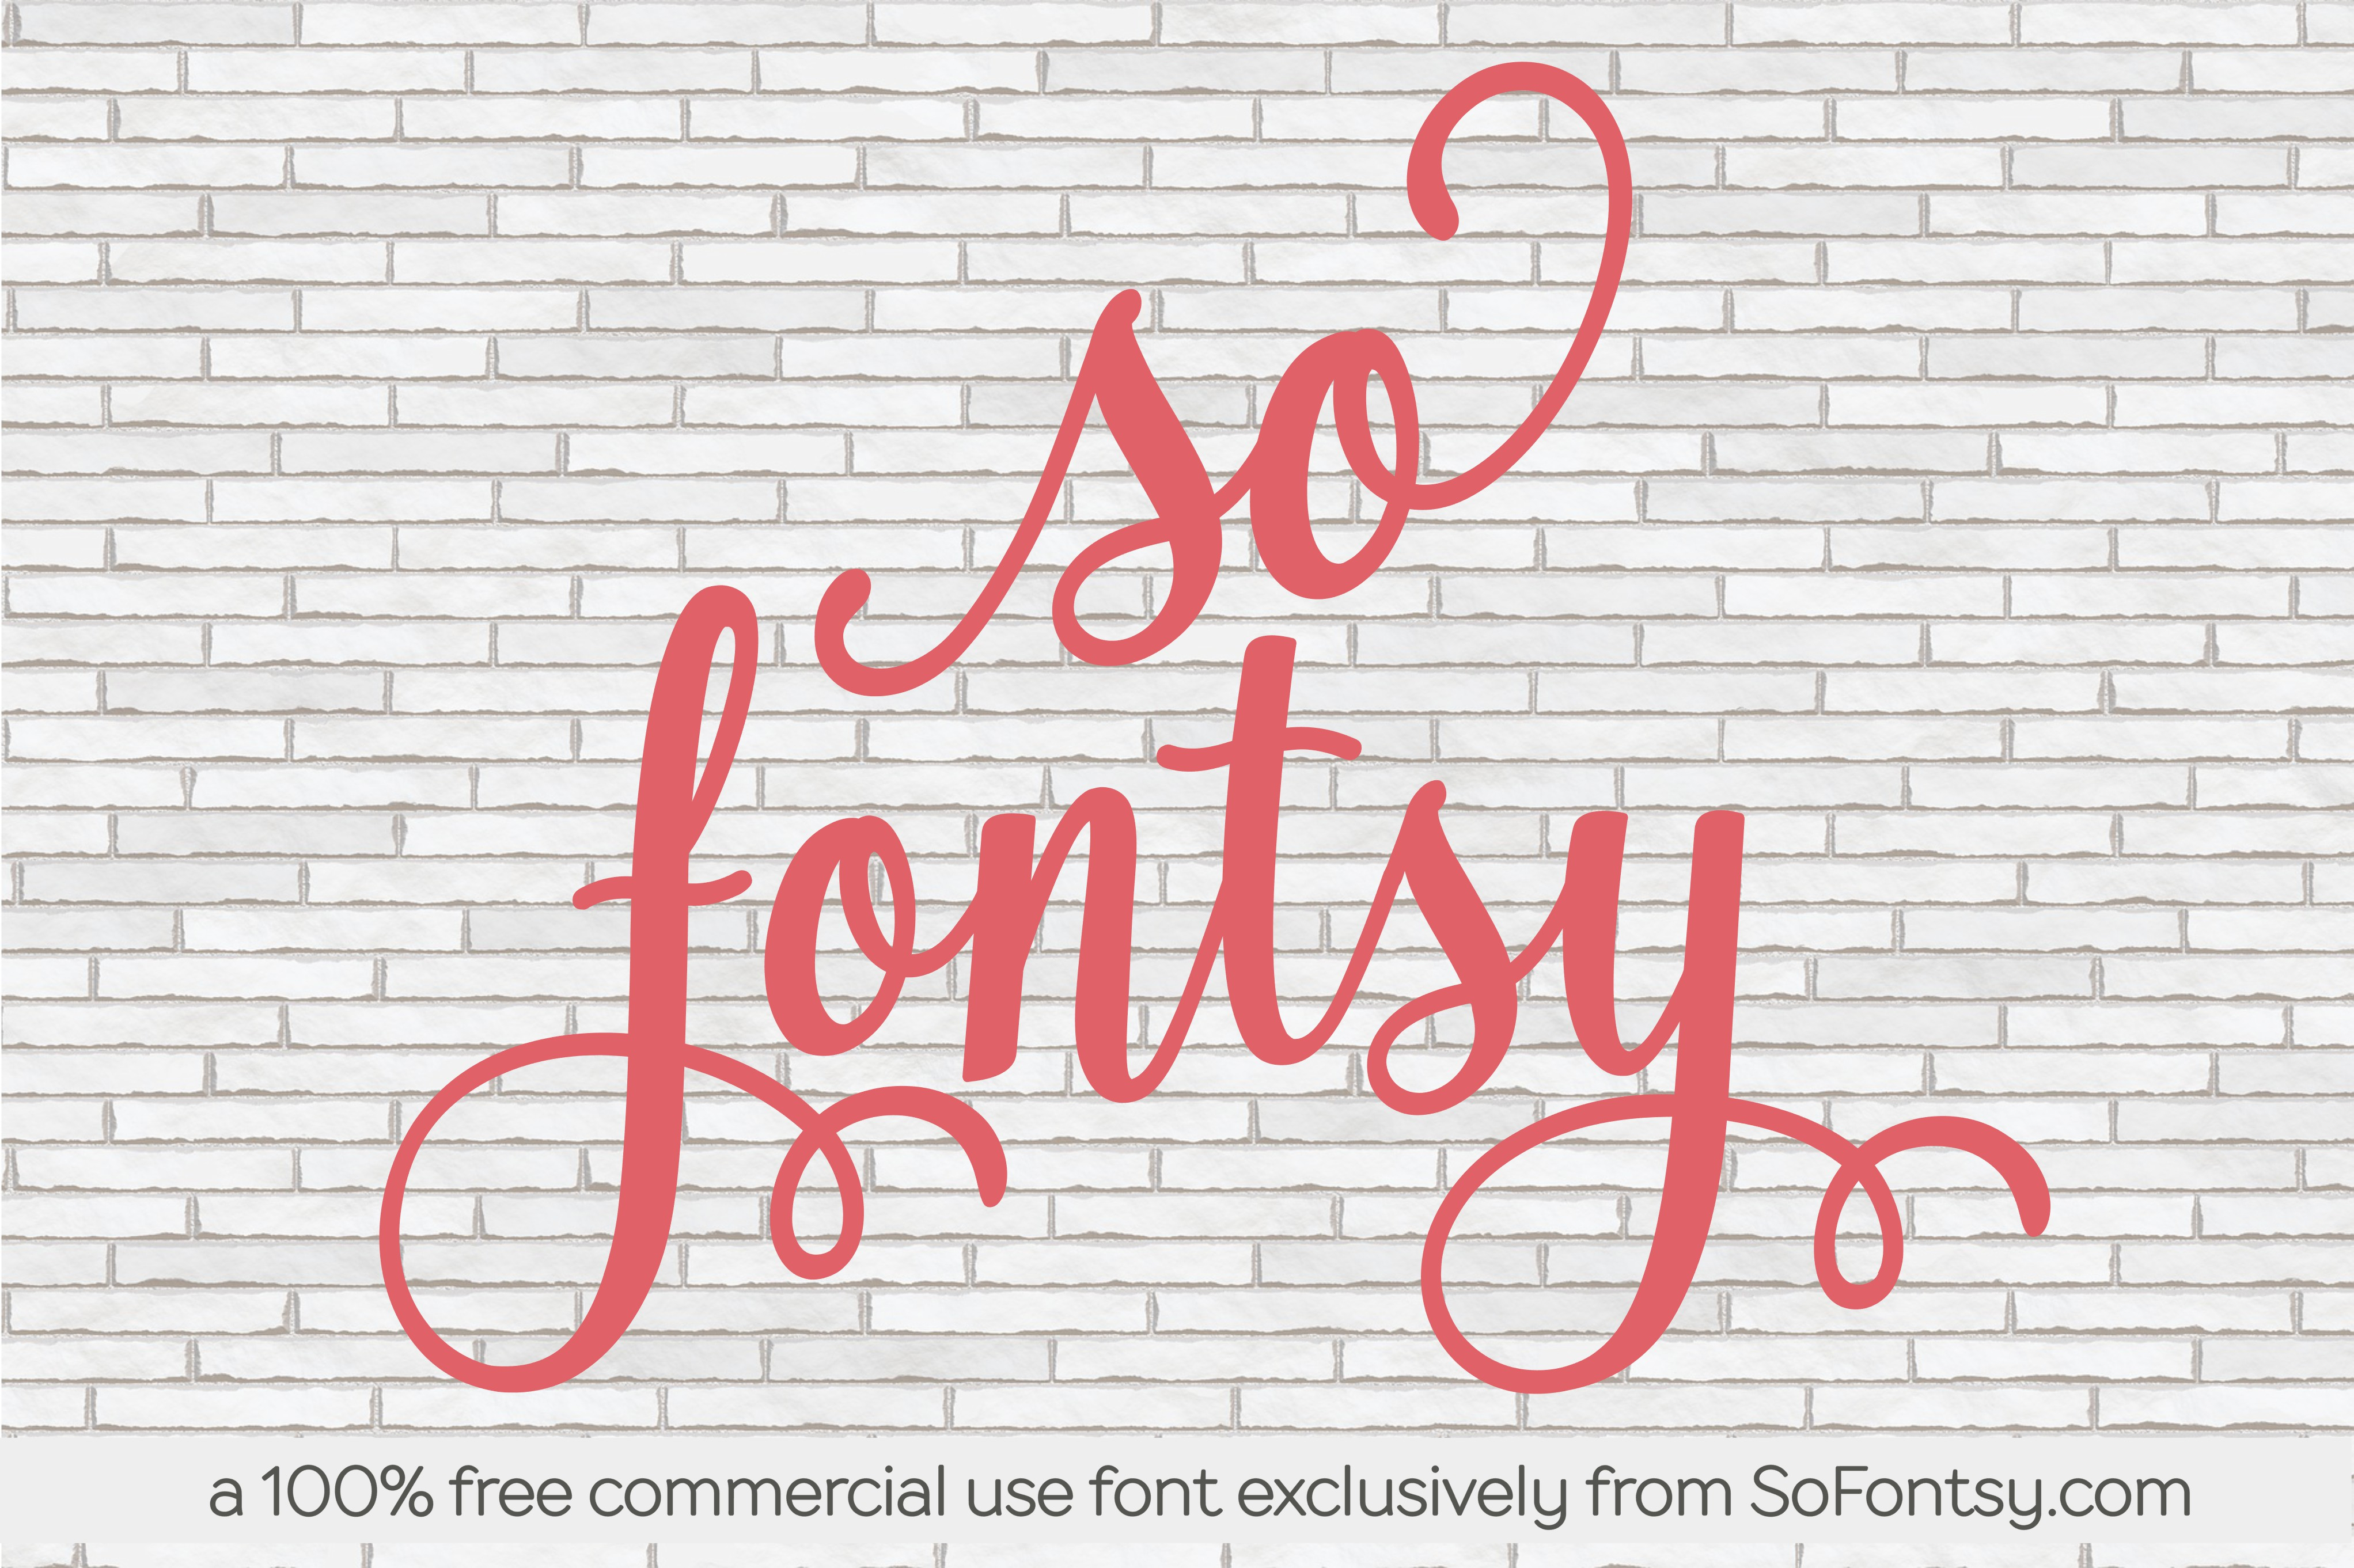 Free Embroidery Alphabet Patterns The So Fontsy Font So Fontsy Exclusive Sofontsy